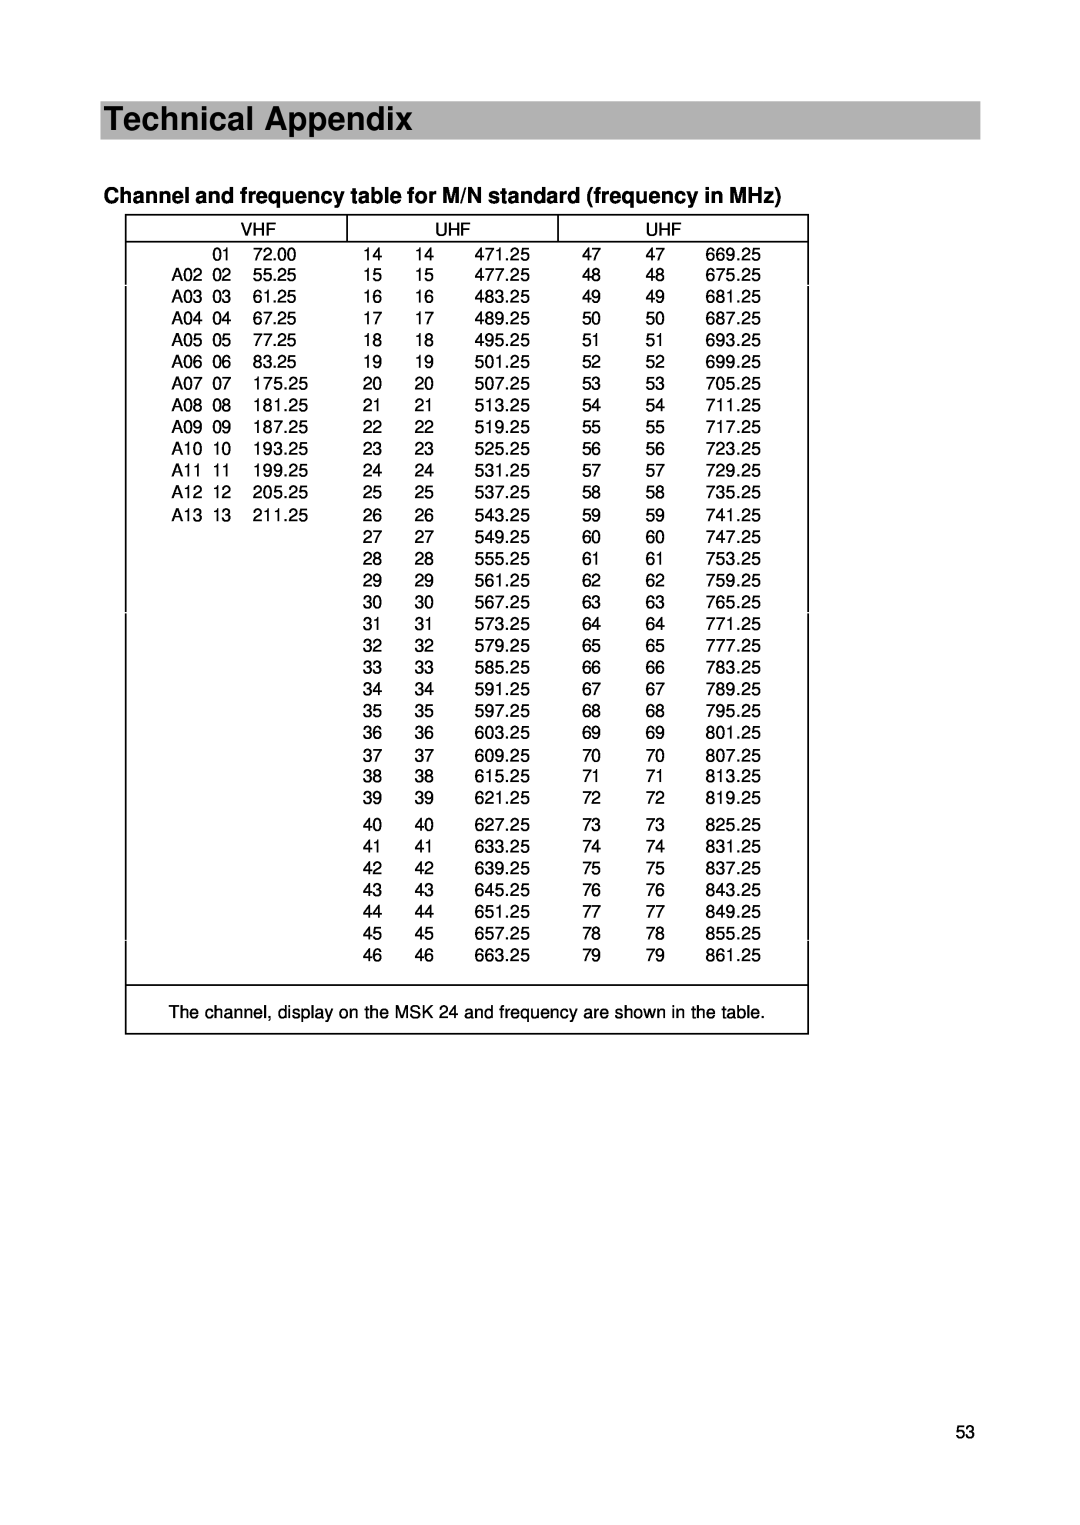 Kathrein MSK 24 manual Channel and frequency table for M/N standard frequency in MHz, Technical Appendix 